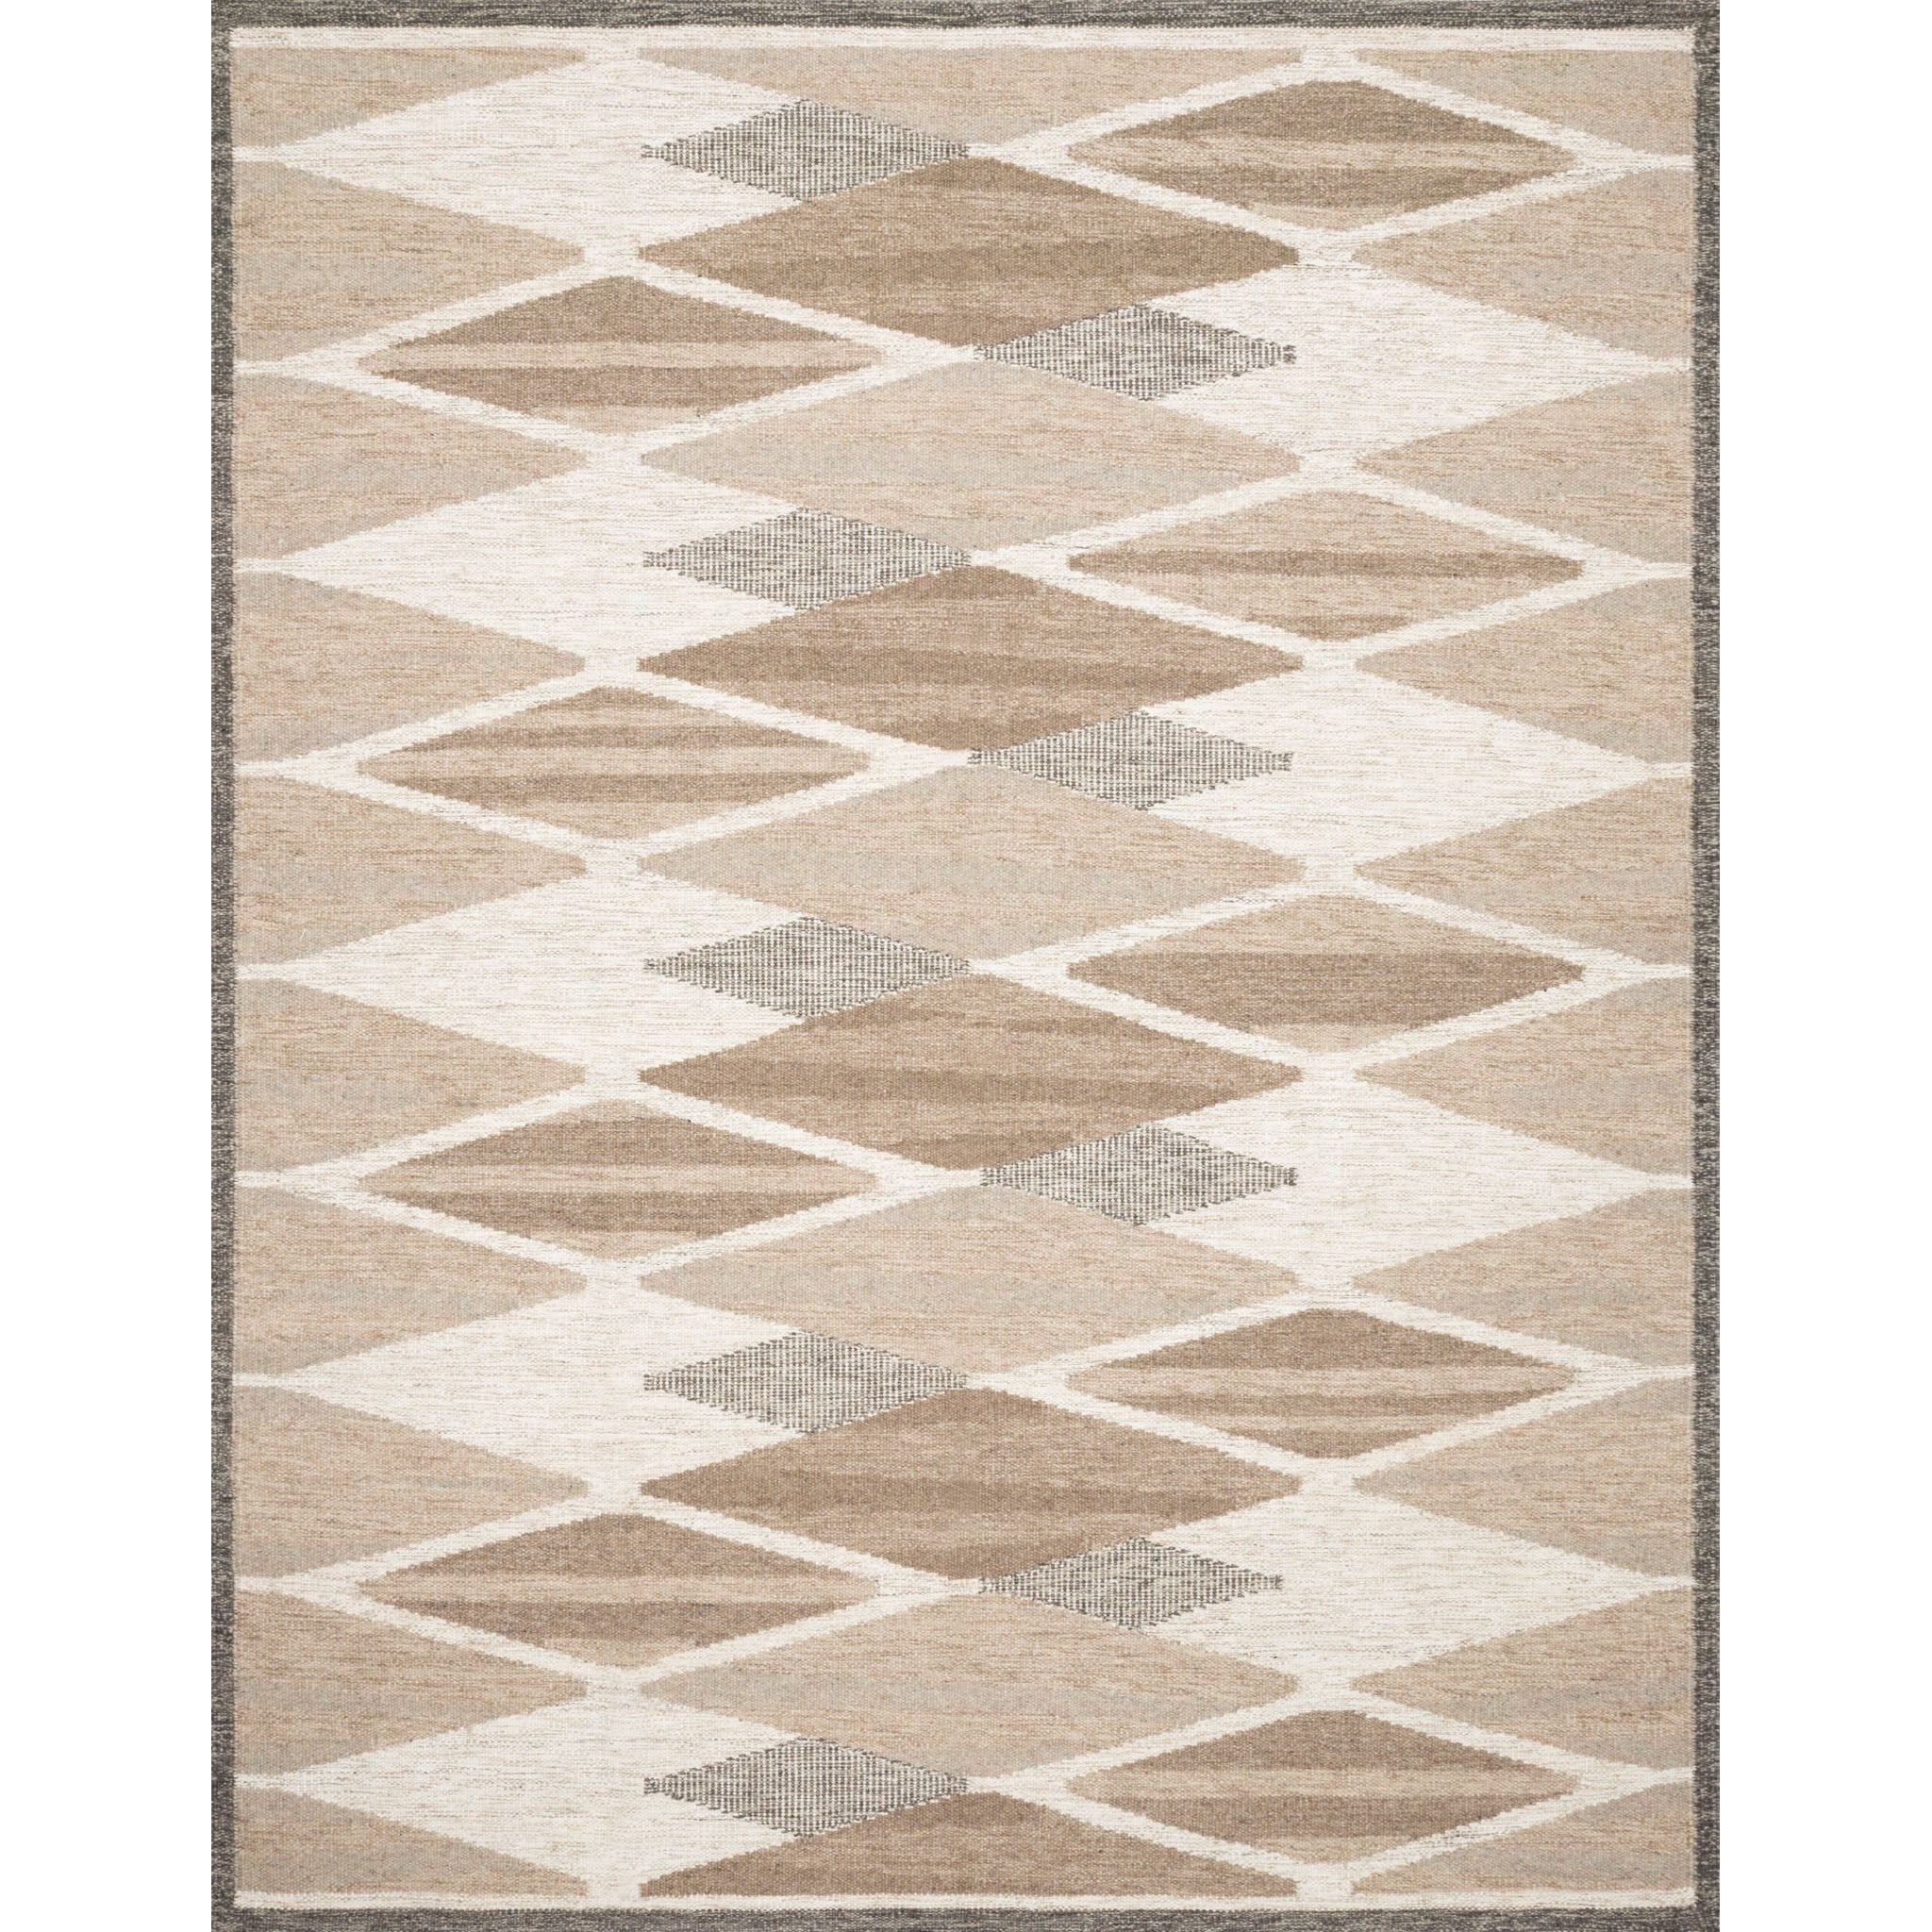 Evelina Taupe/Bark Rug - Amethyst Home Hand-woven in India with a luxurious blend of wool, cotton, viscose, viscose from bamboo, chenille, acrylic and linen, this calming collection of contemporary neutral tones will add balance and warmth to any space.